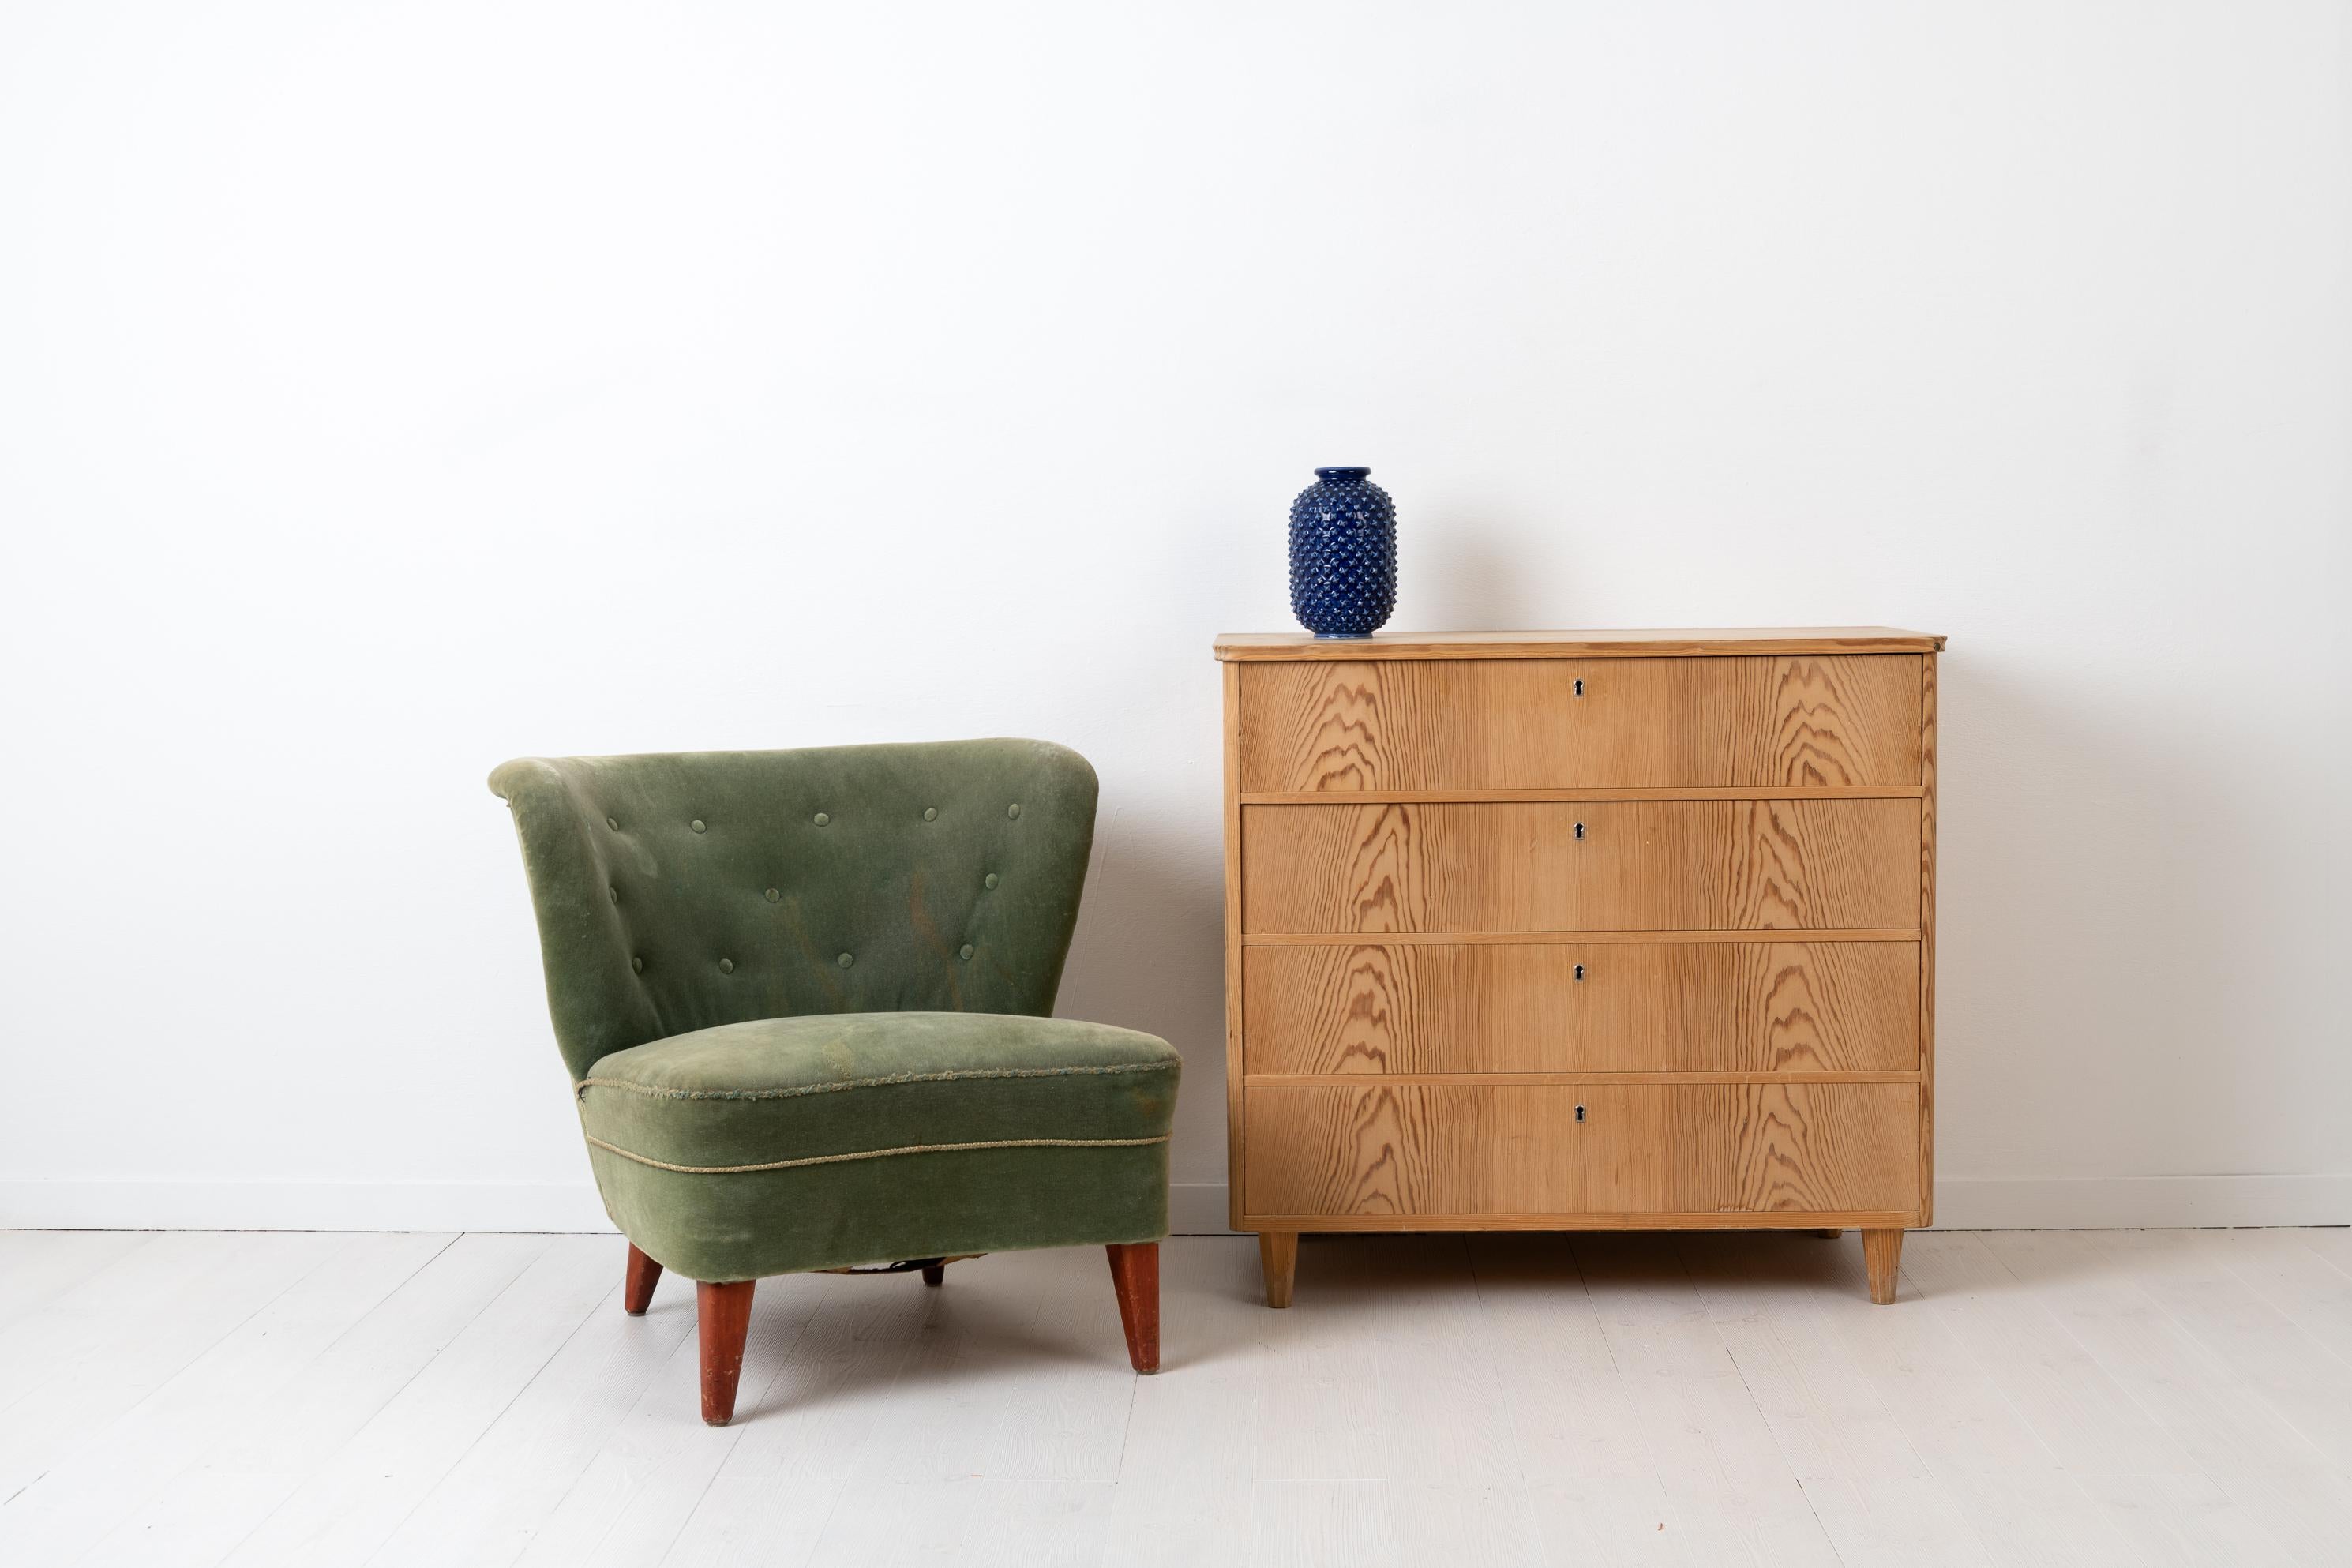 Gösta Jonsson easy chair from the mid-20th century. The chair is made during the 1940s and 1950s in Sweden and has the original green plush upholstery. Typically for the Scandinavian Modern period the chair is a good example of the minimalistic and